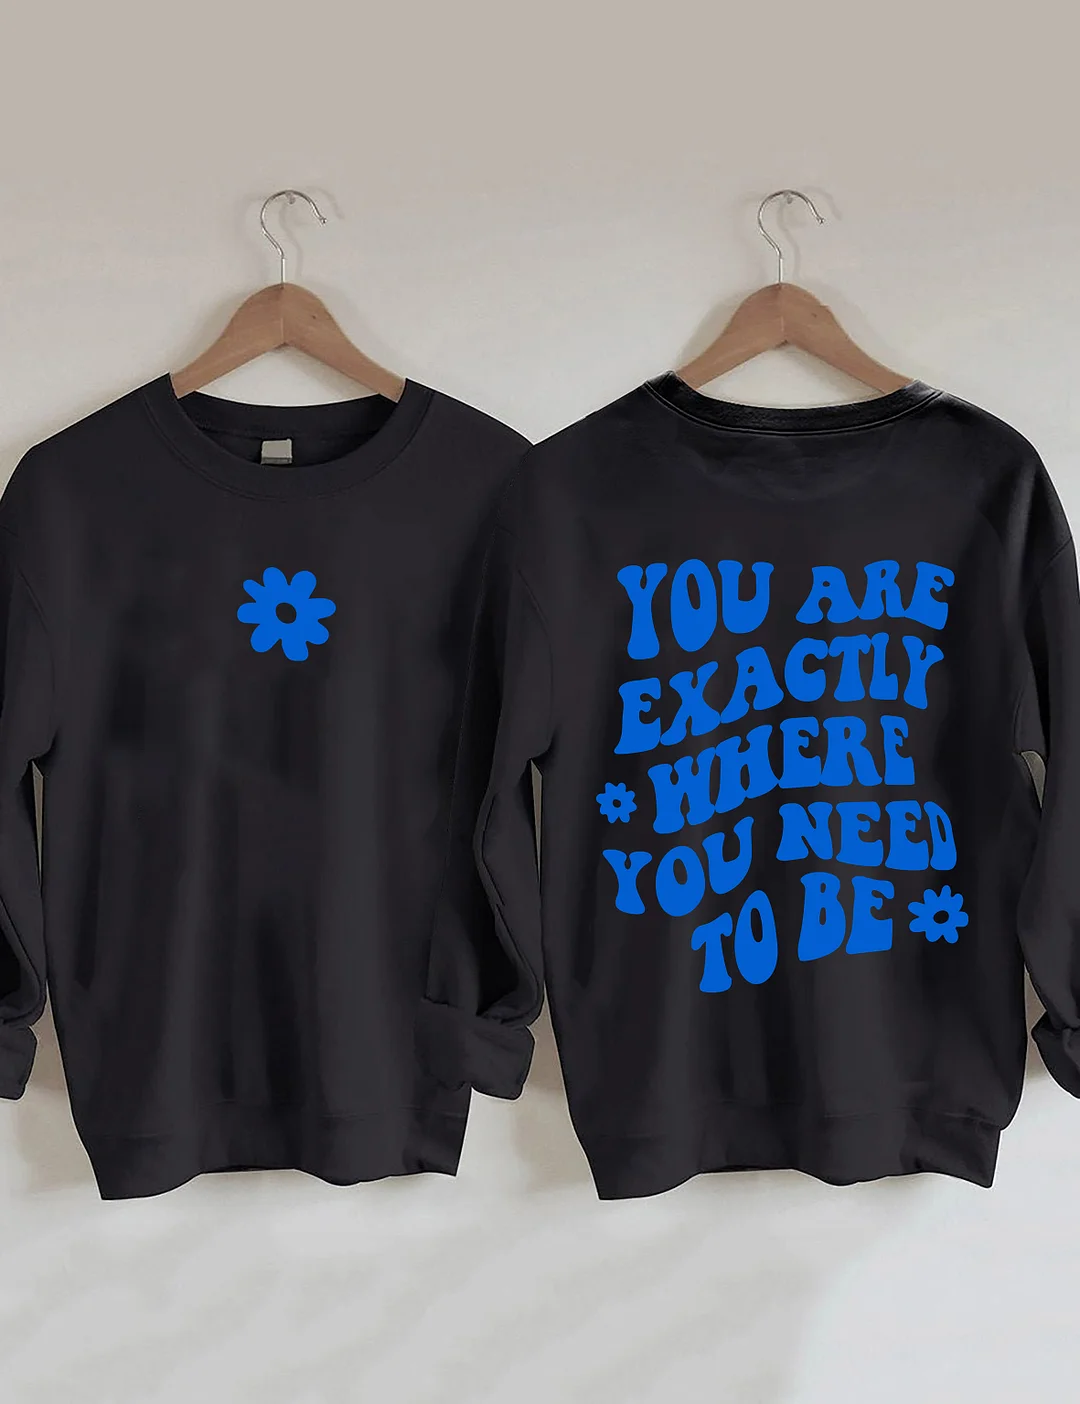 You Are Exactly Where You Need To Be Sweatshirt